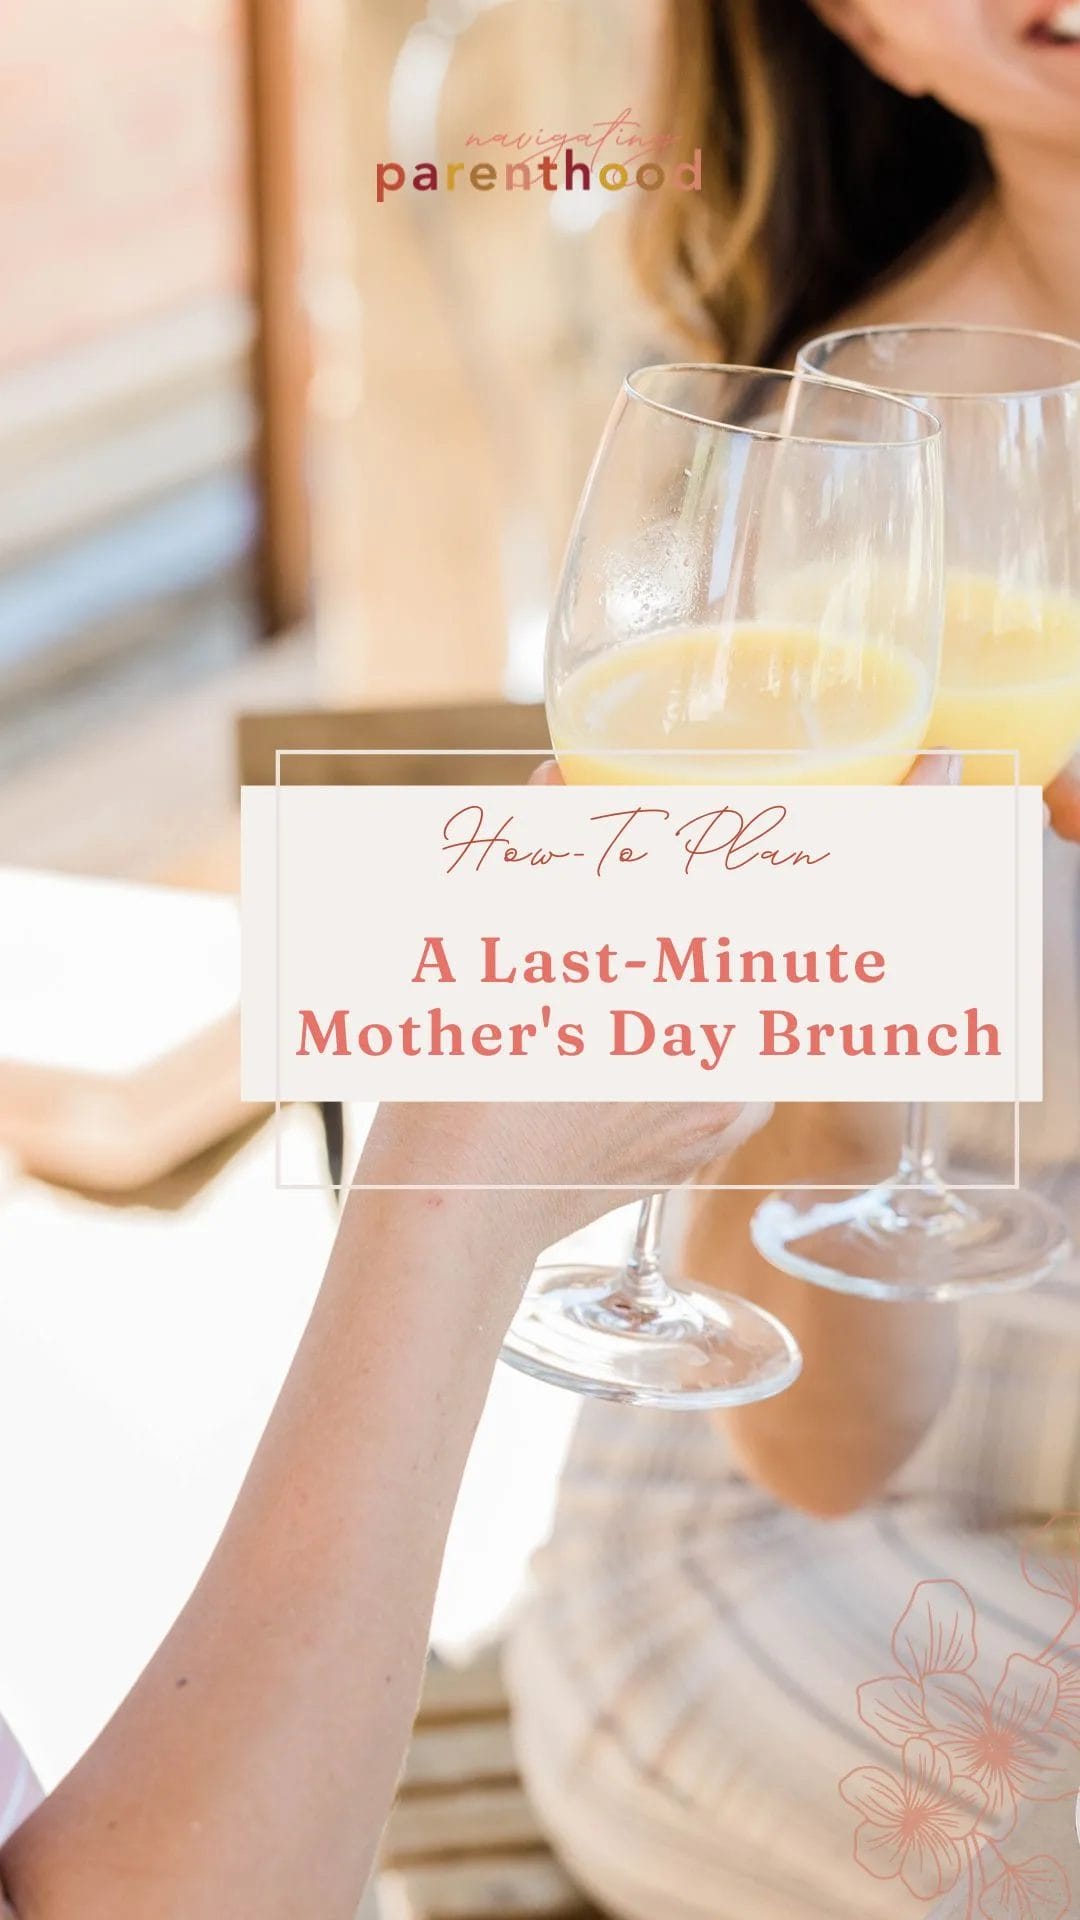 Last Minute Mother's Day Brunch Ideas